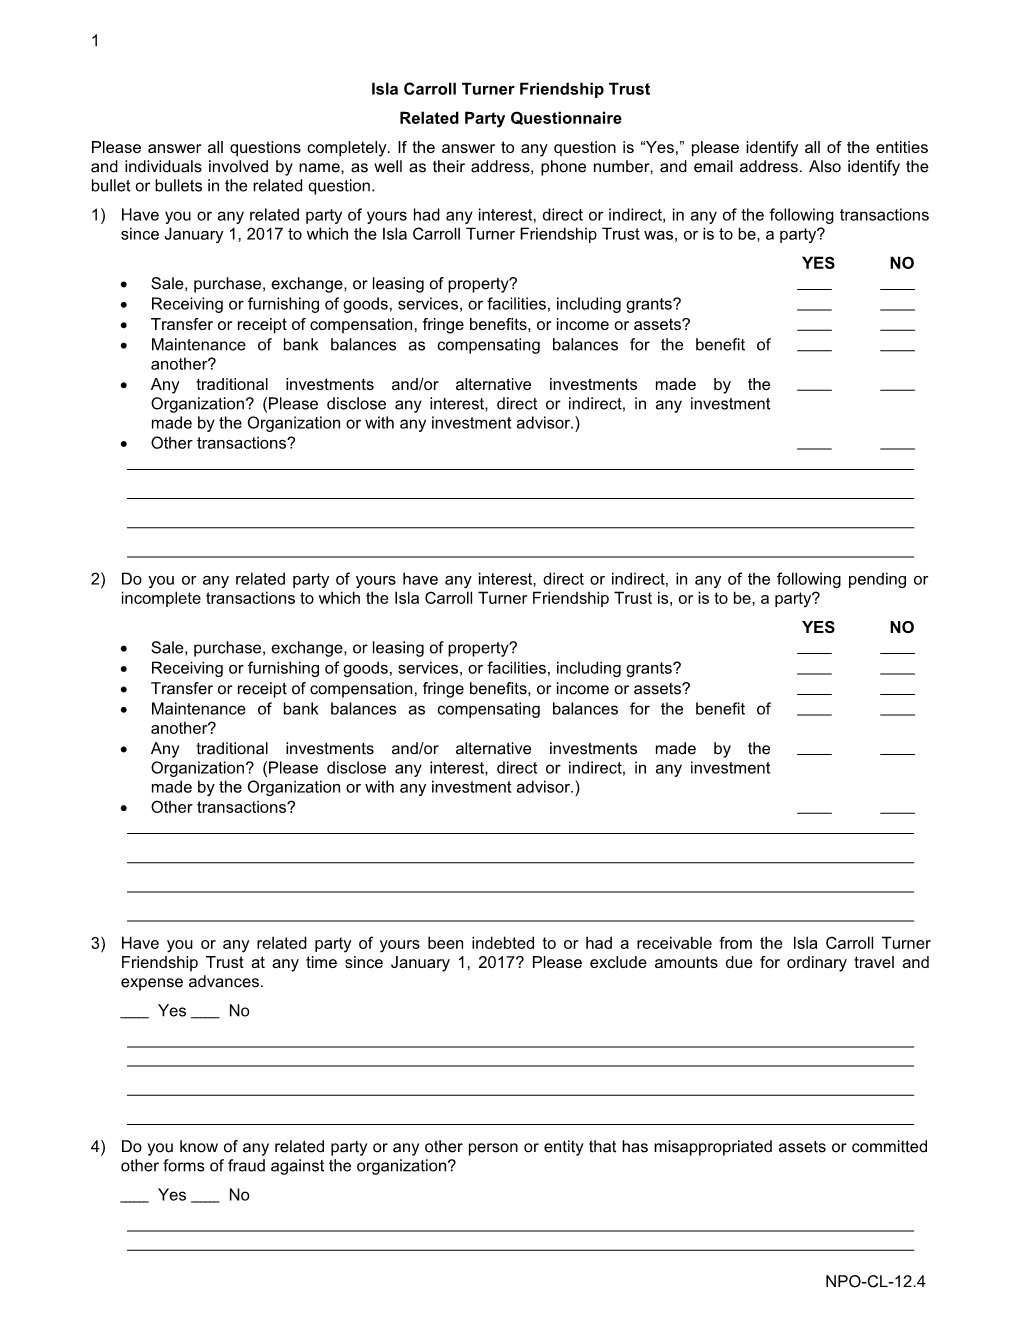 NPO CL 12 4 Related Party Questionnaire